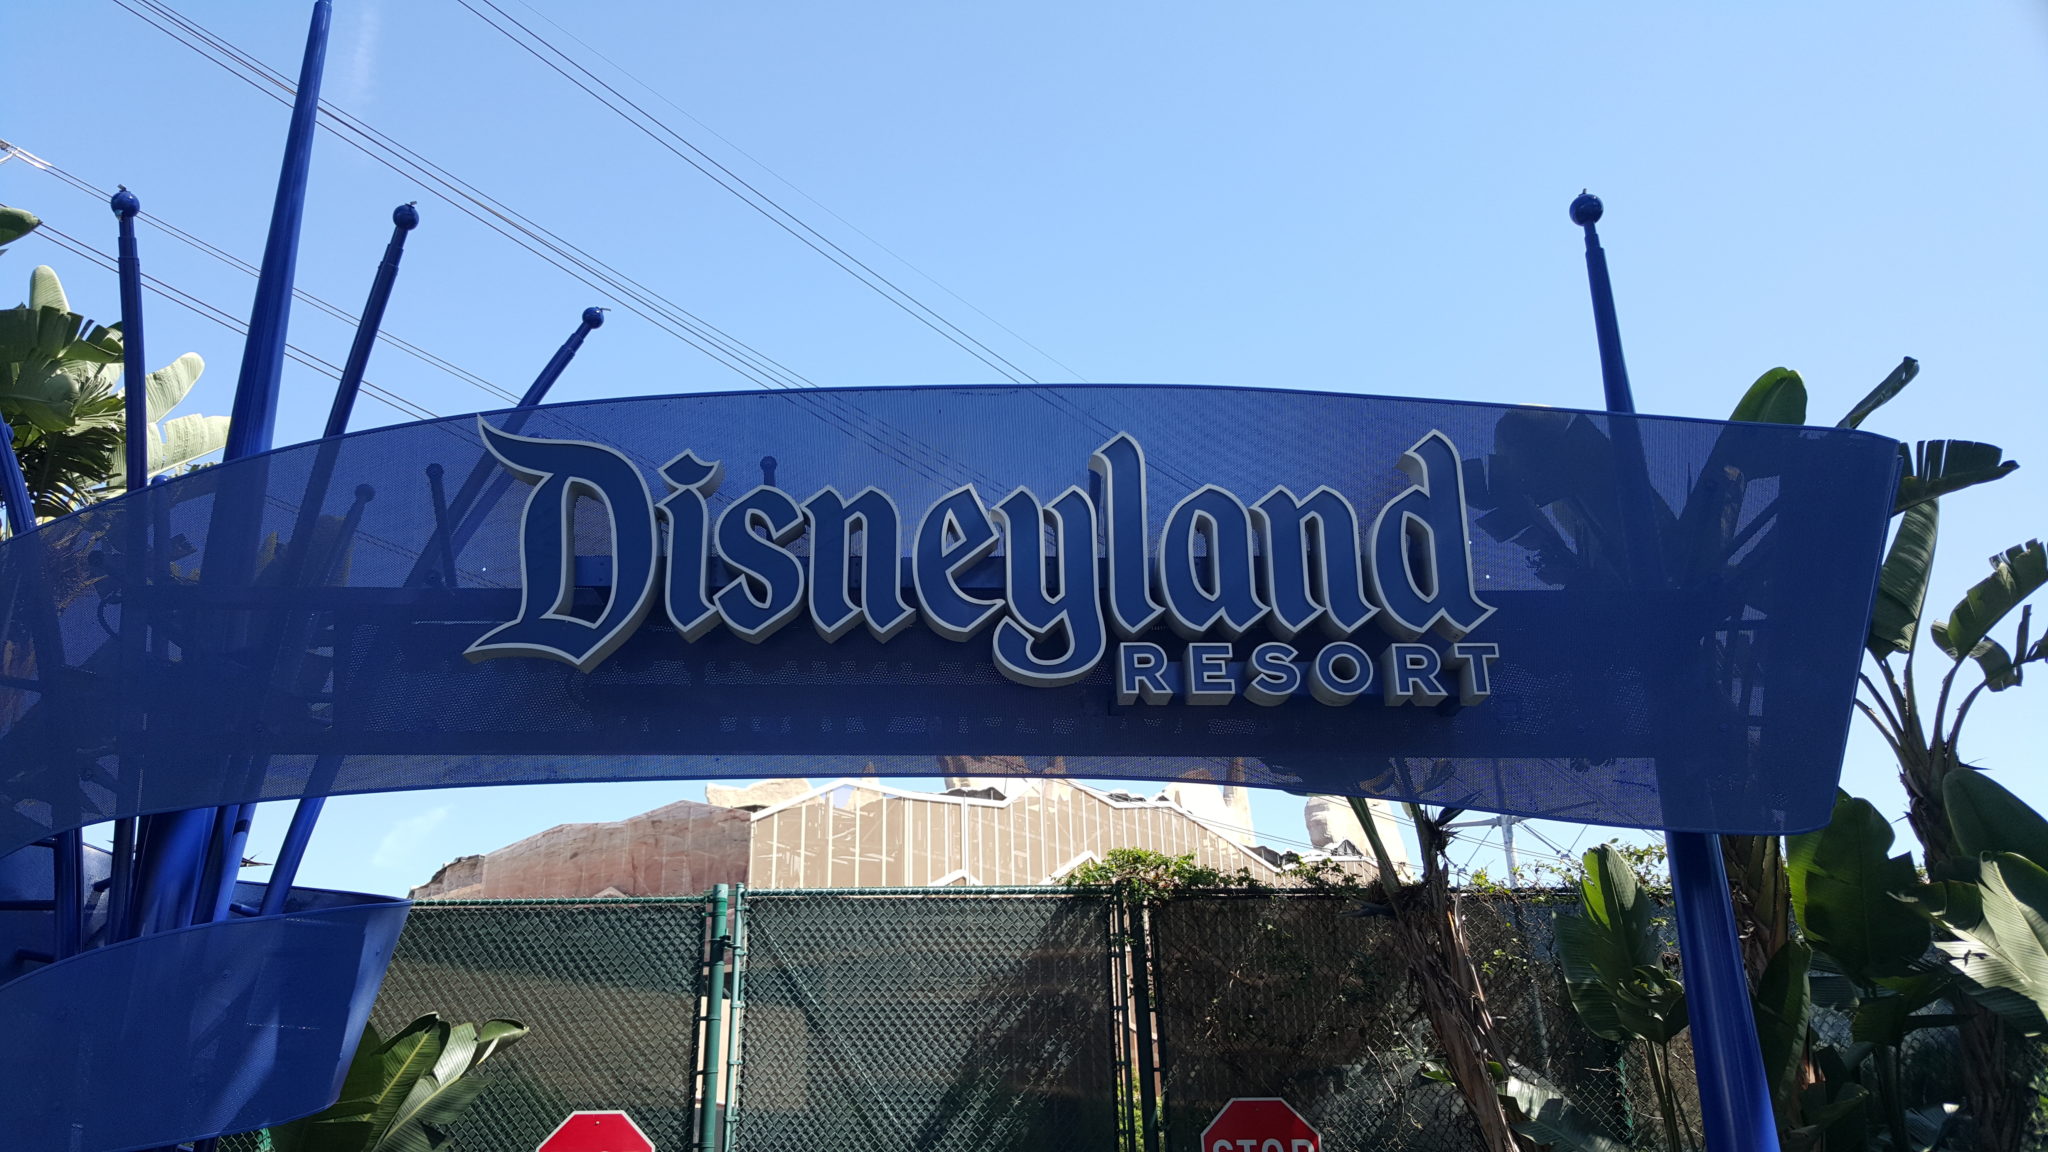 Canadian Residents: Save 25% on Tickets and Enjoy More of the Disneyland Resort